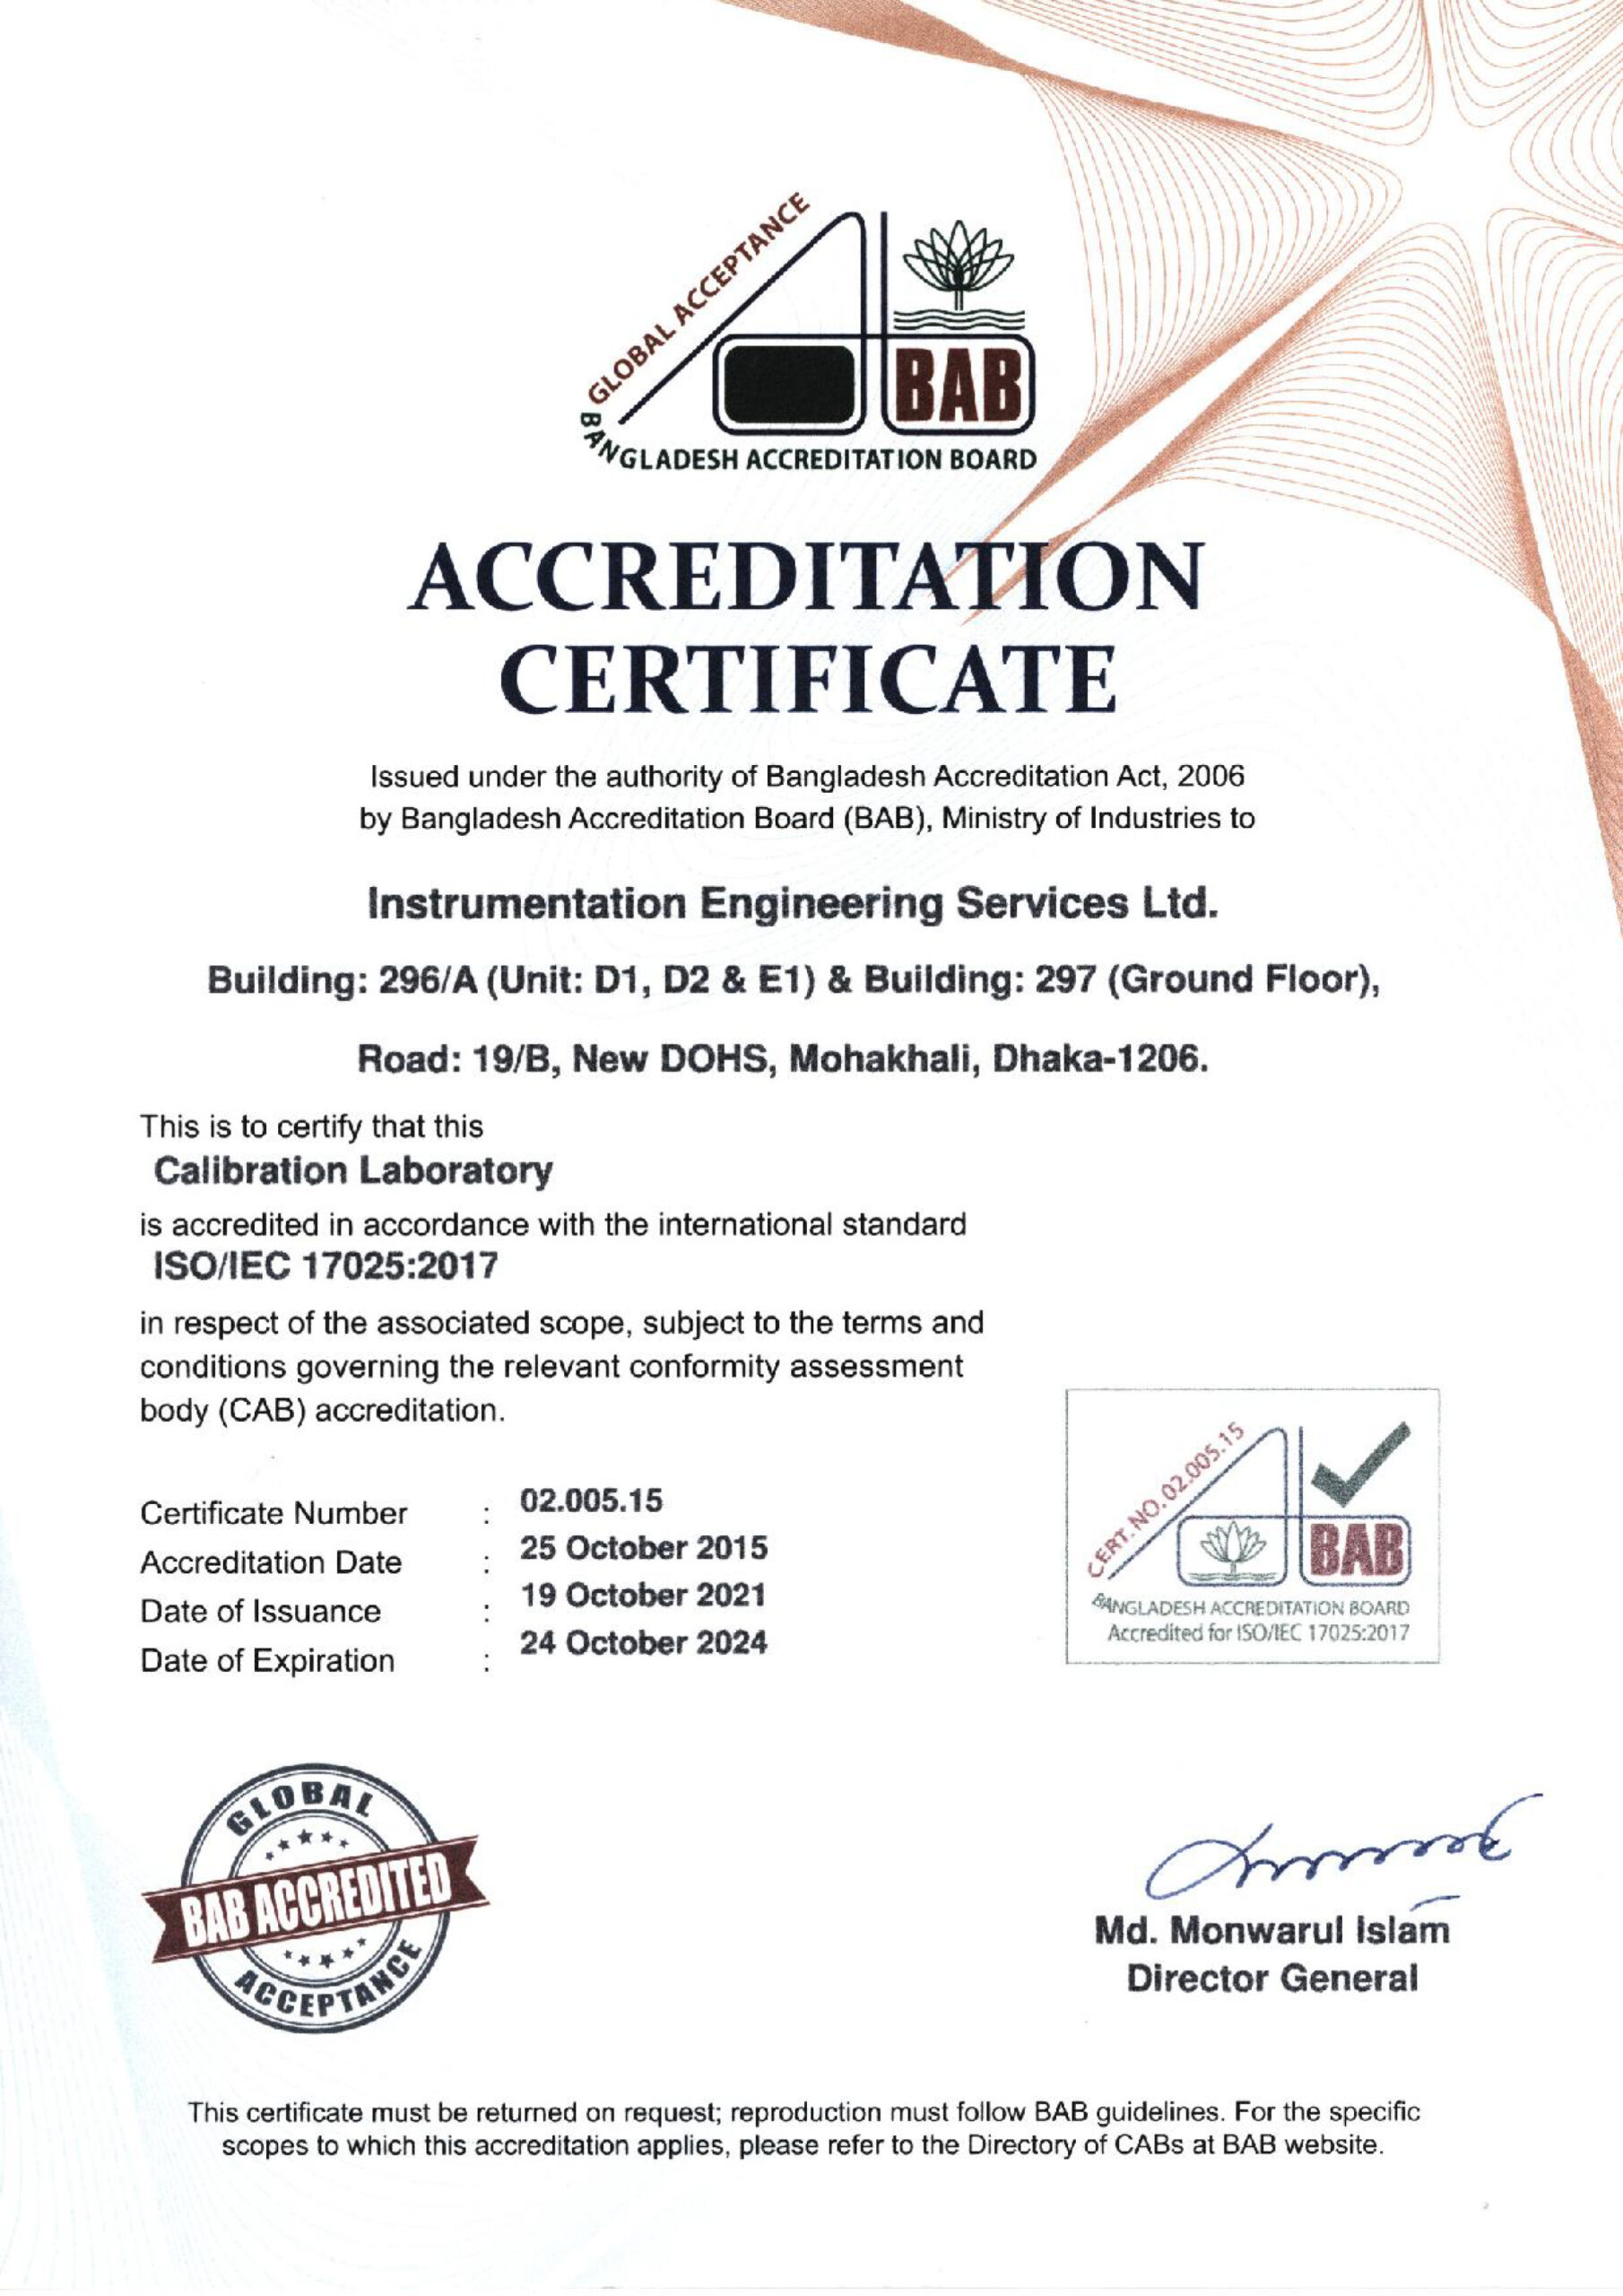 IESL Accreditation Certificate by BAB